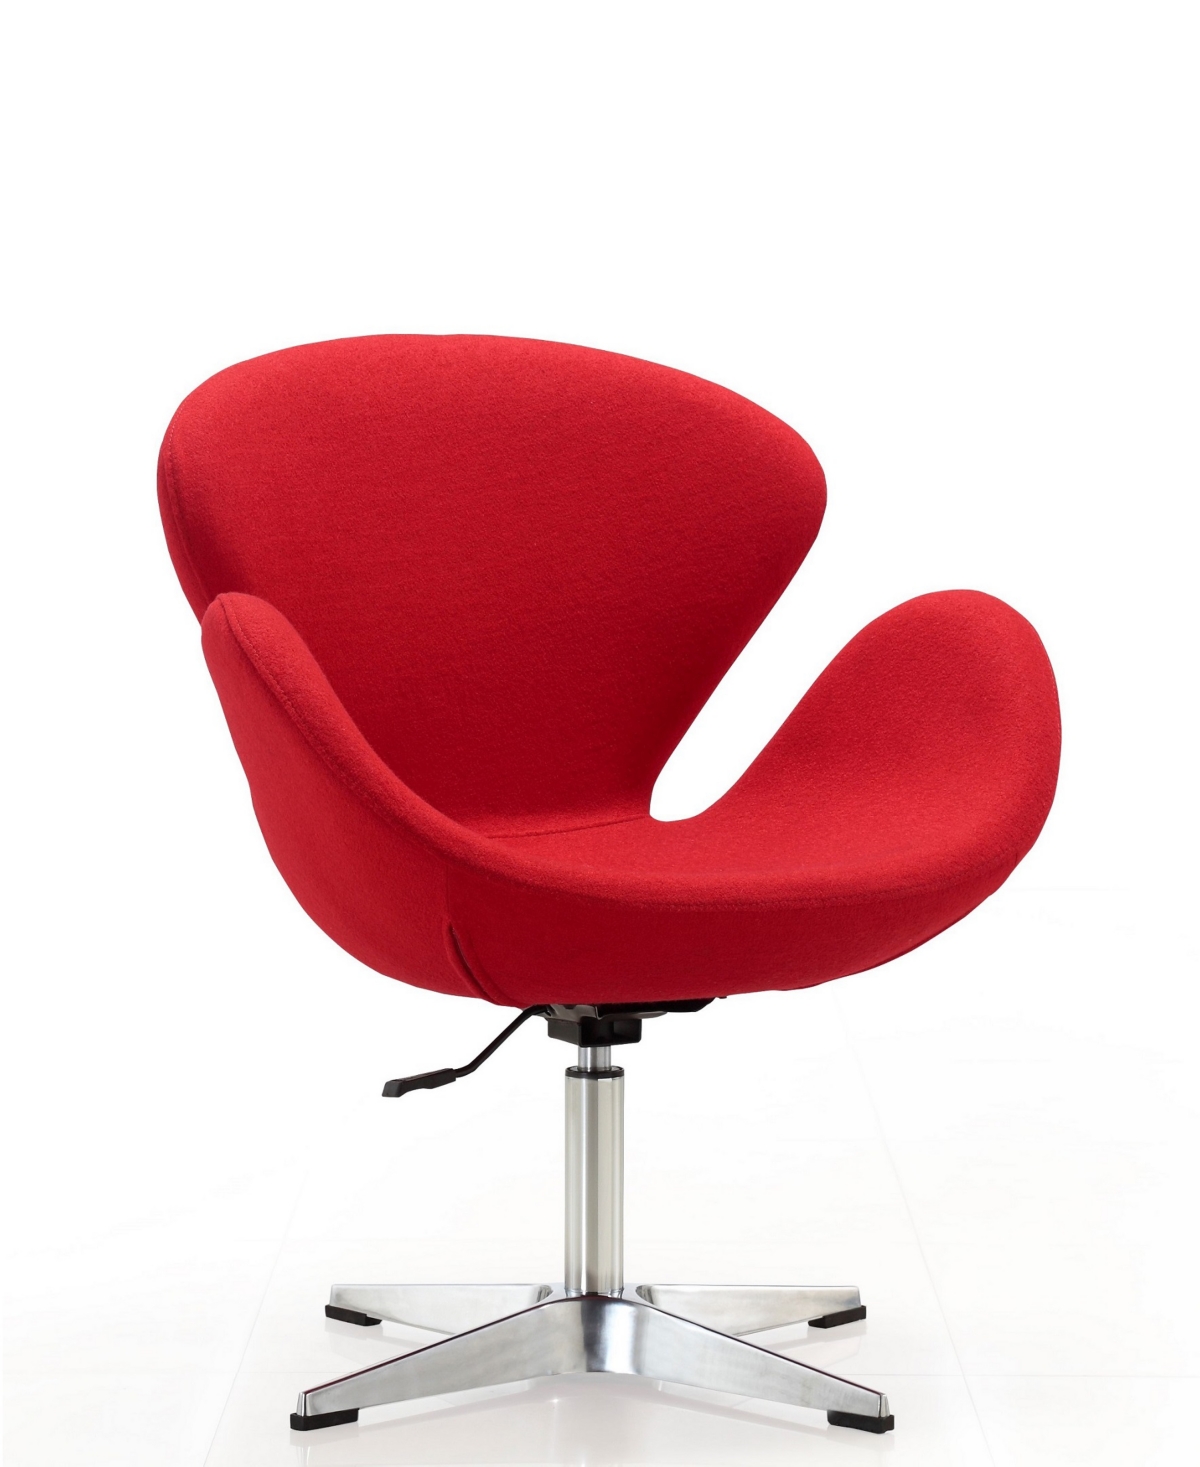 Manhattan Comfort Raspberry Adjustable Swivel Chair In Red,polished Chrome